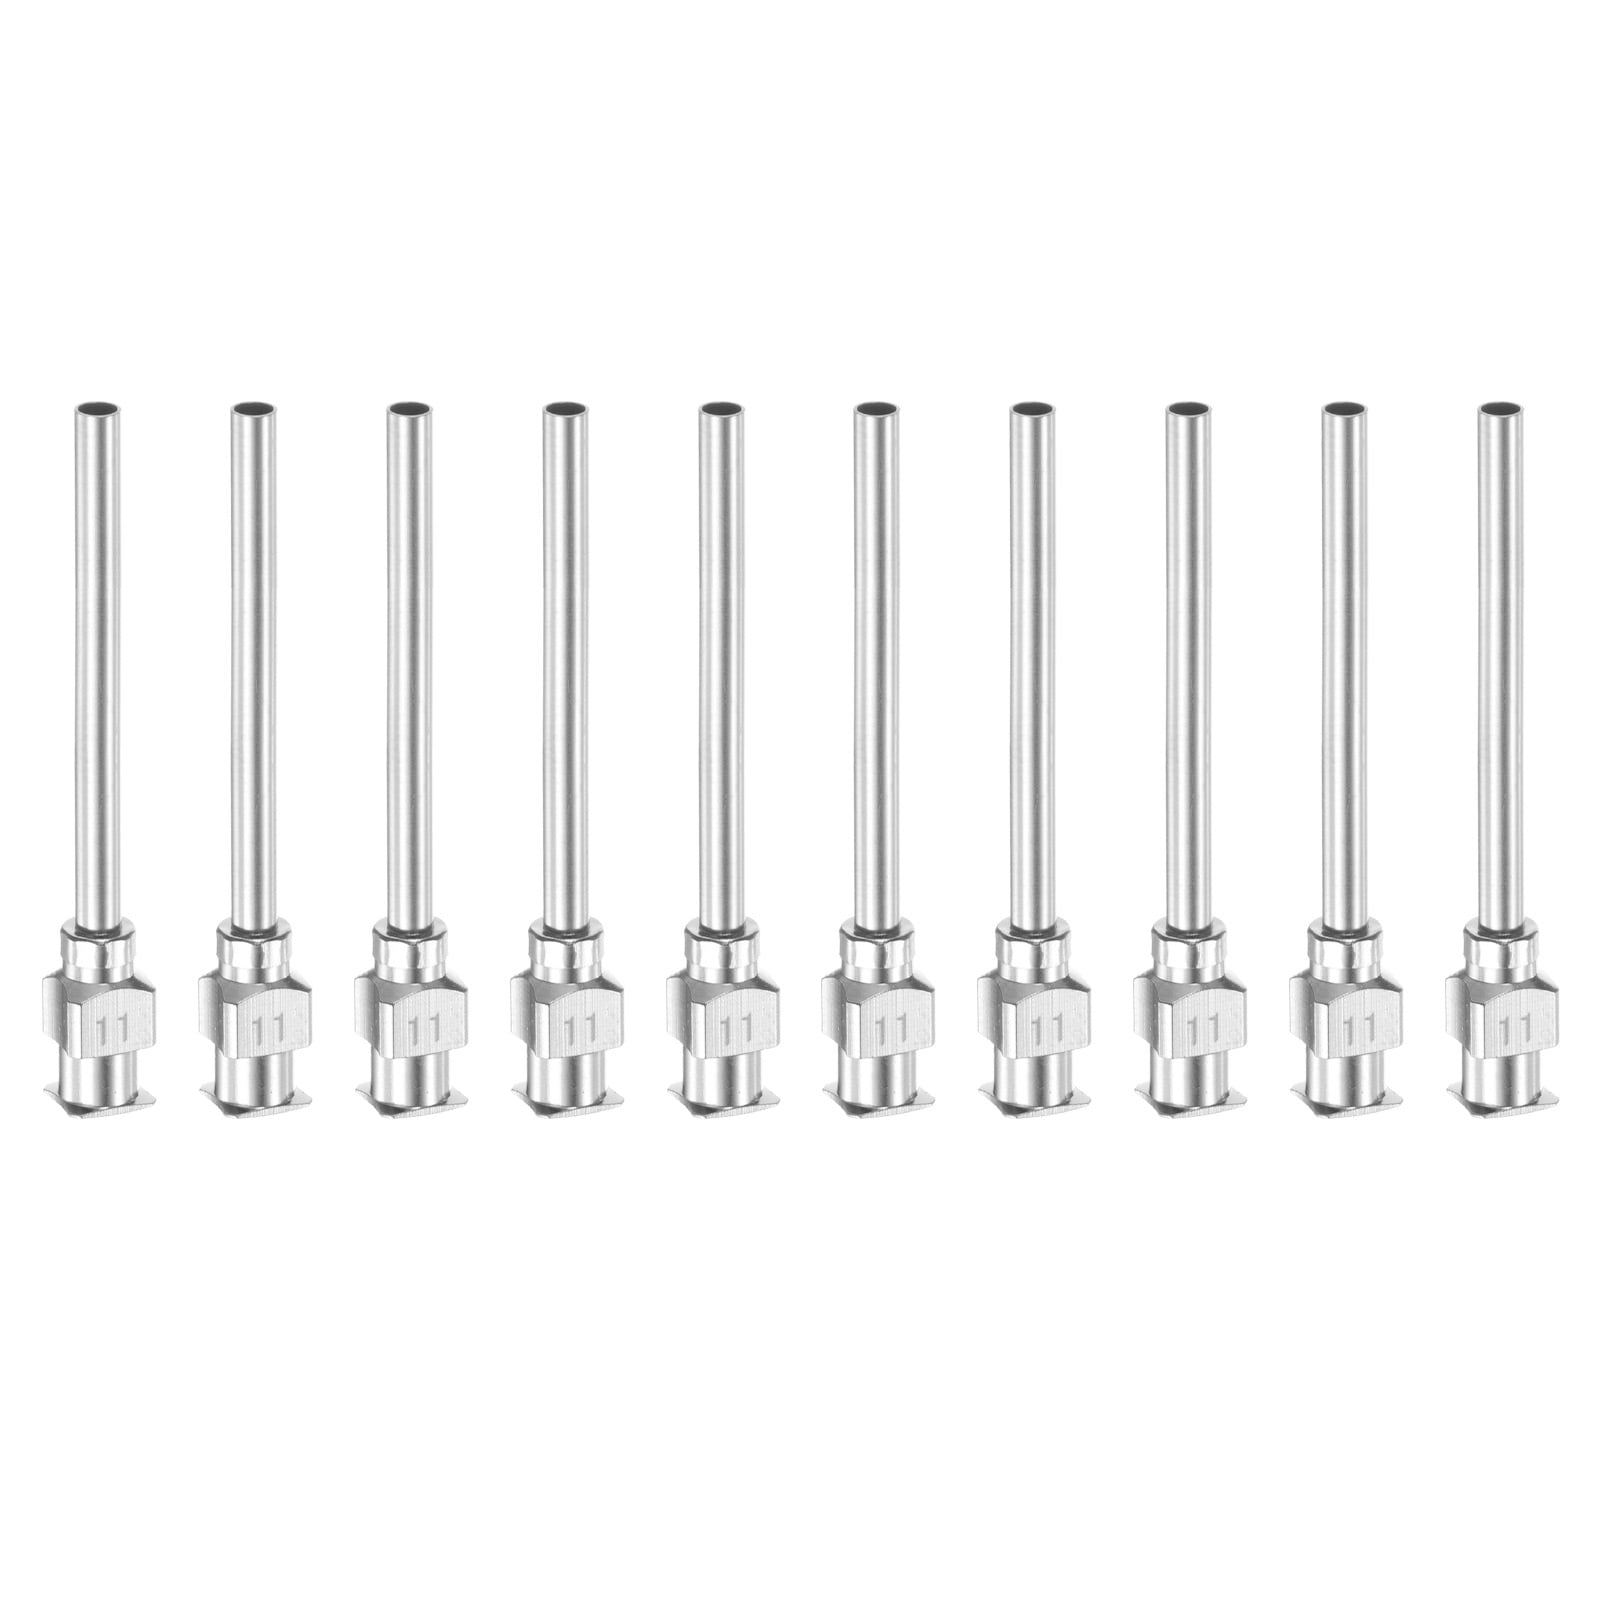 12 Pack 1 inch Stainless Steel Dispensing Needles - 6 Different Size  10/14/18/20/22/25 Gauge Luer Lock Syringe Tips Glue Blunt All Metal  Dispense